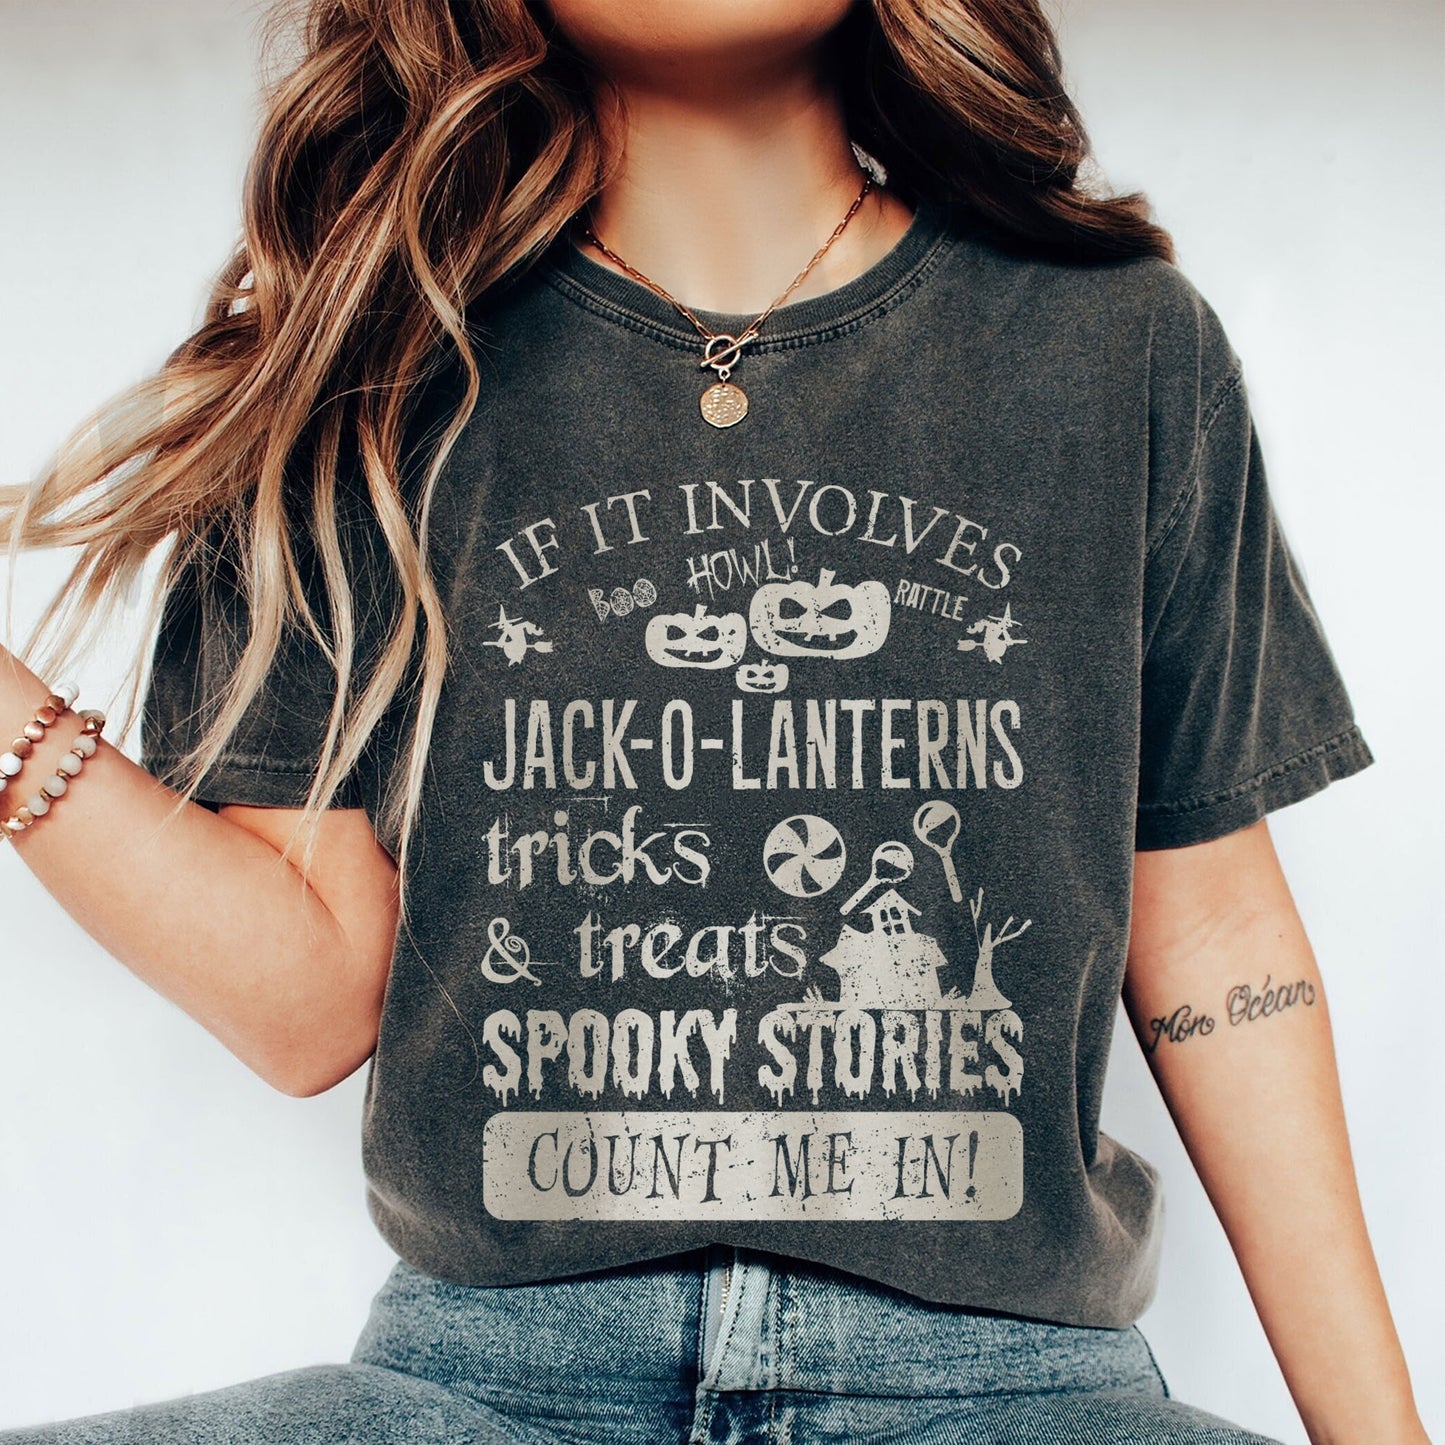 jack o lantern spooky stories count me in oversized garment dyed shirt